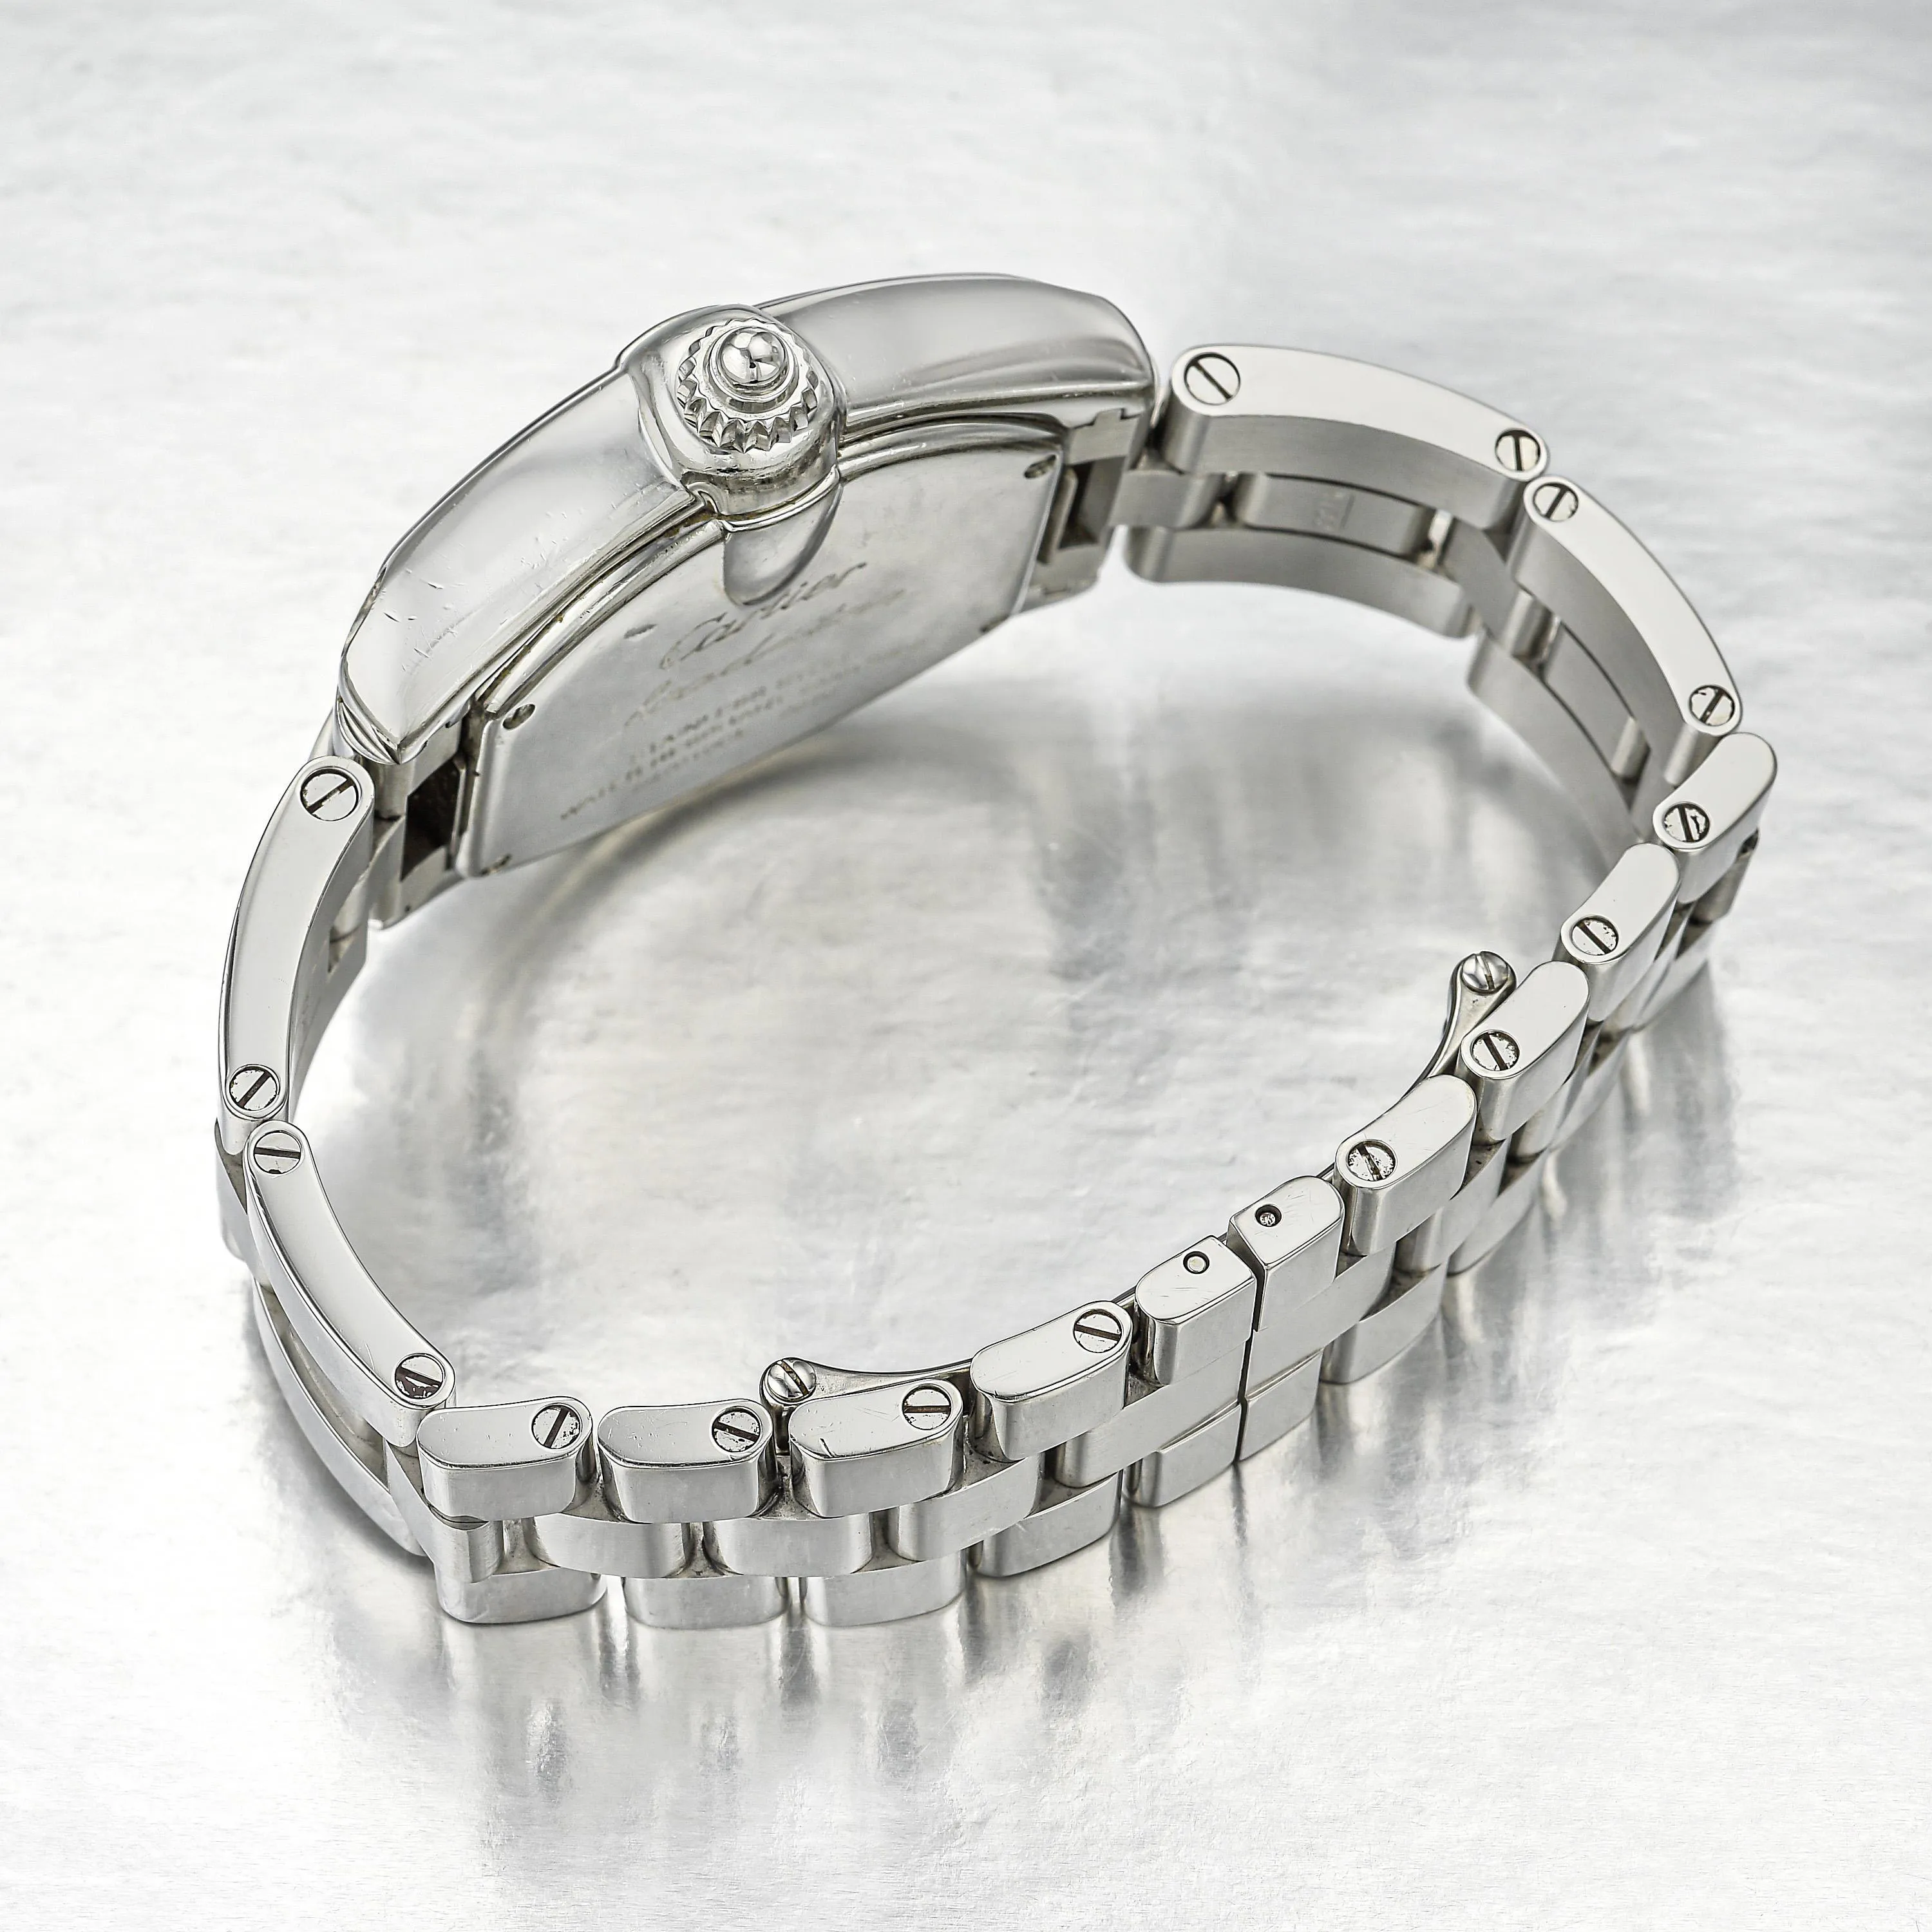 Cartier Roadster 2675 32mm Stainless steel Rose 1